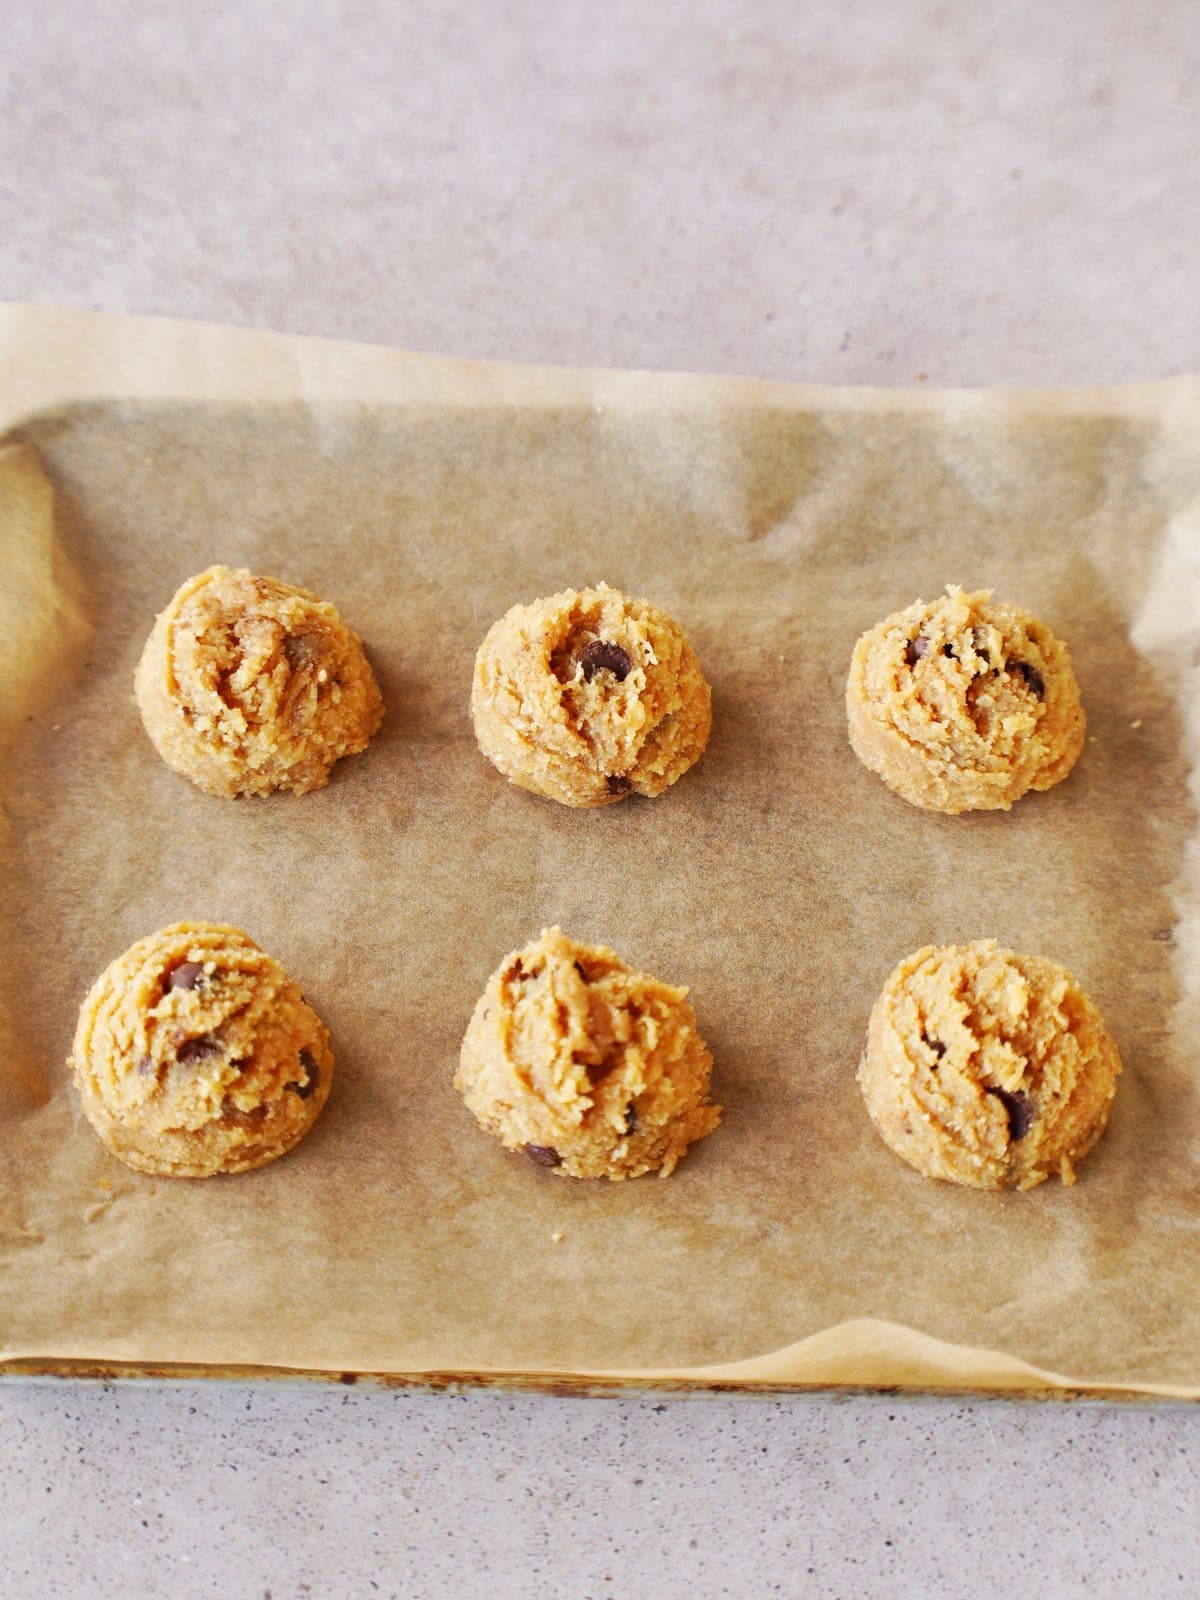 6 gluten-free cookies before baking on parchment paper